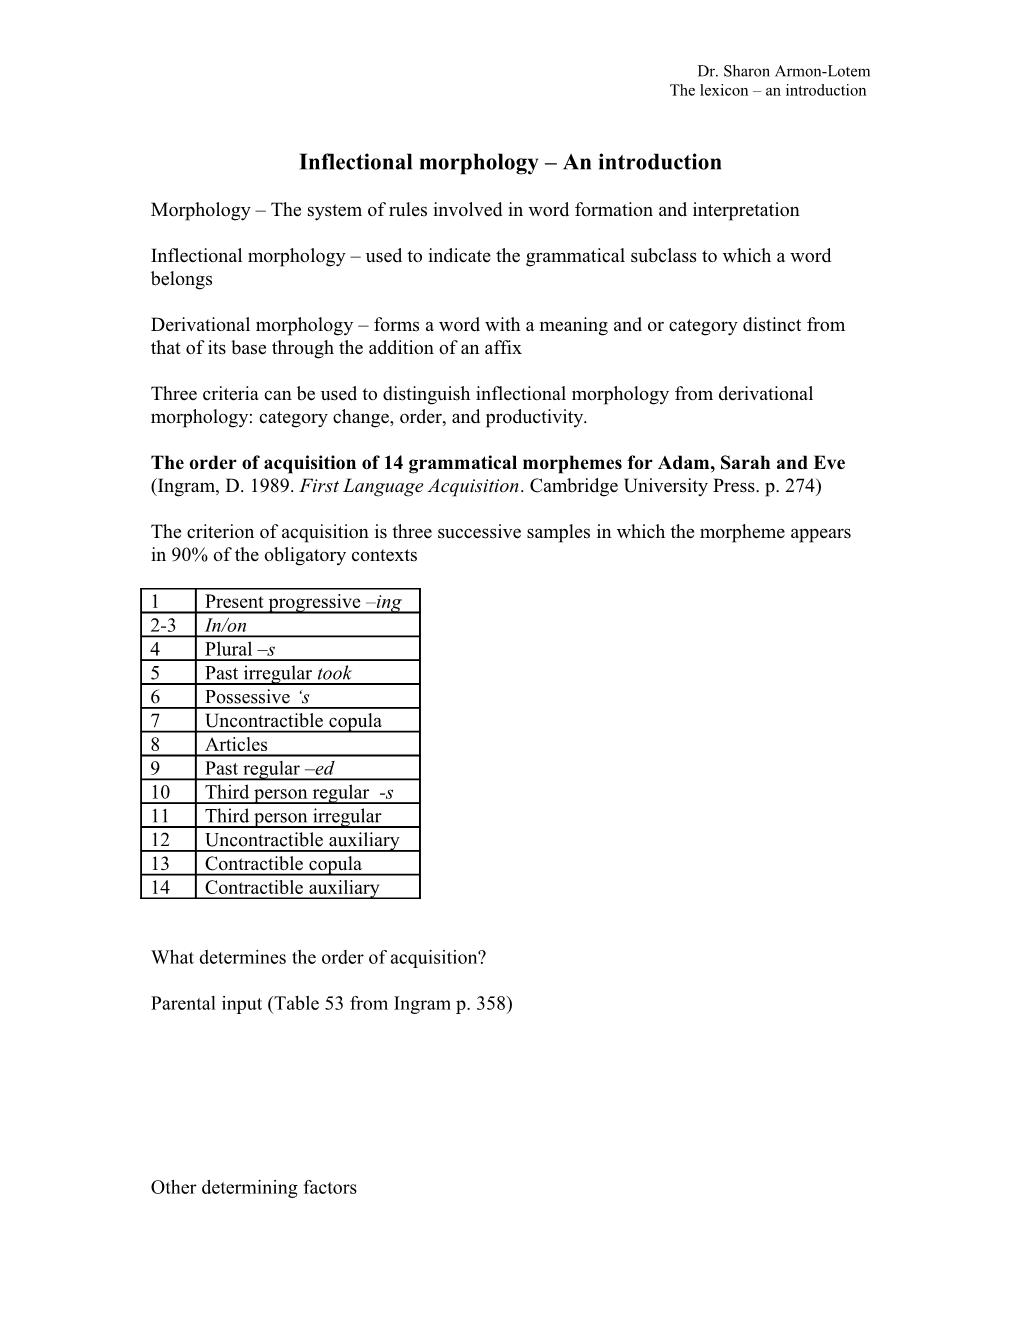 Inflectional Morphology an Introduction